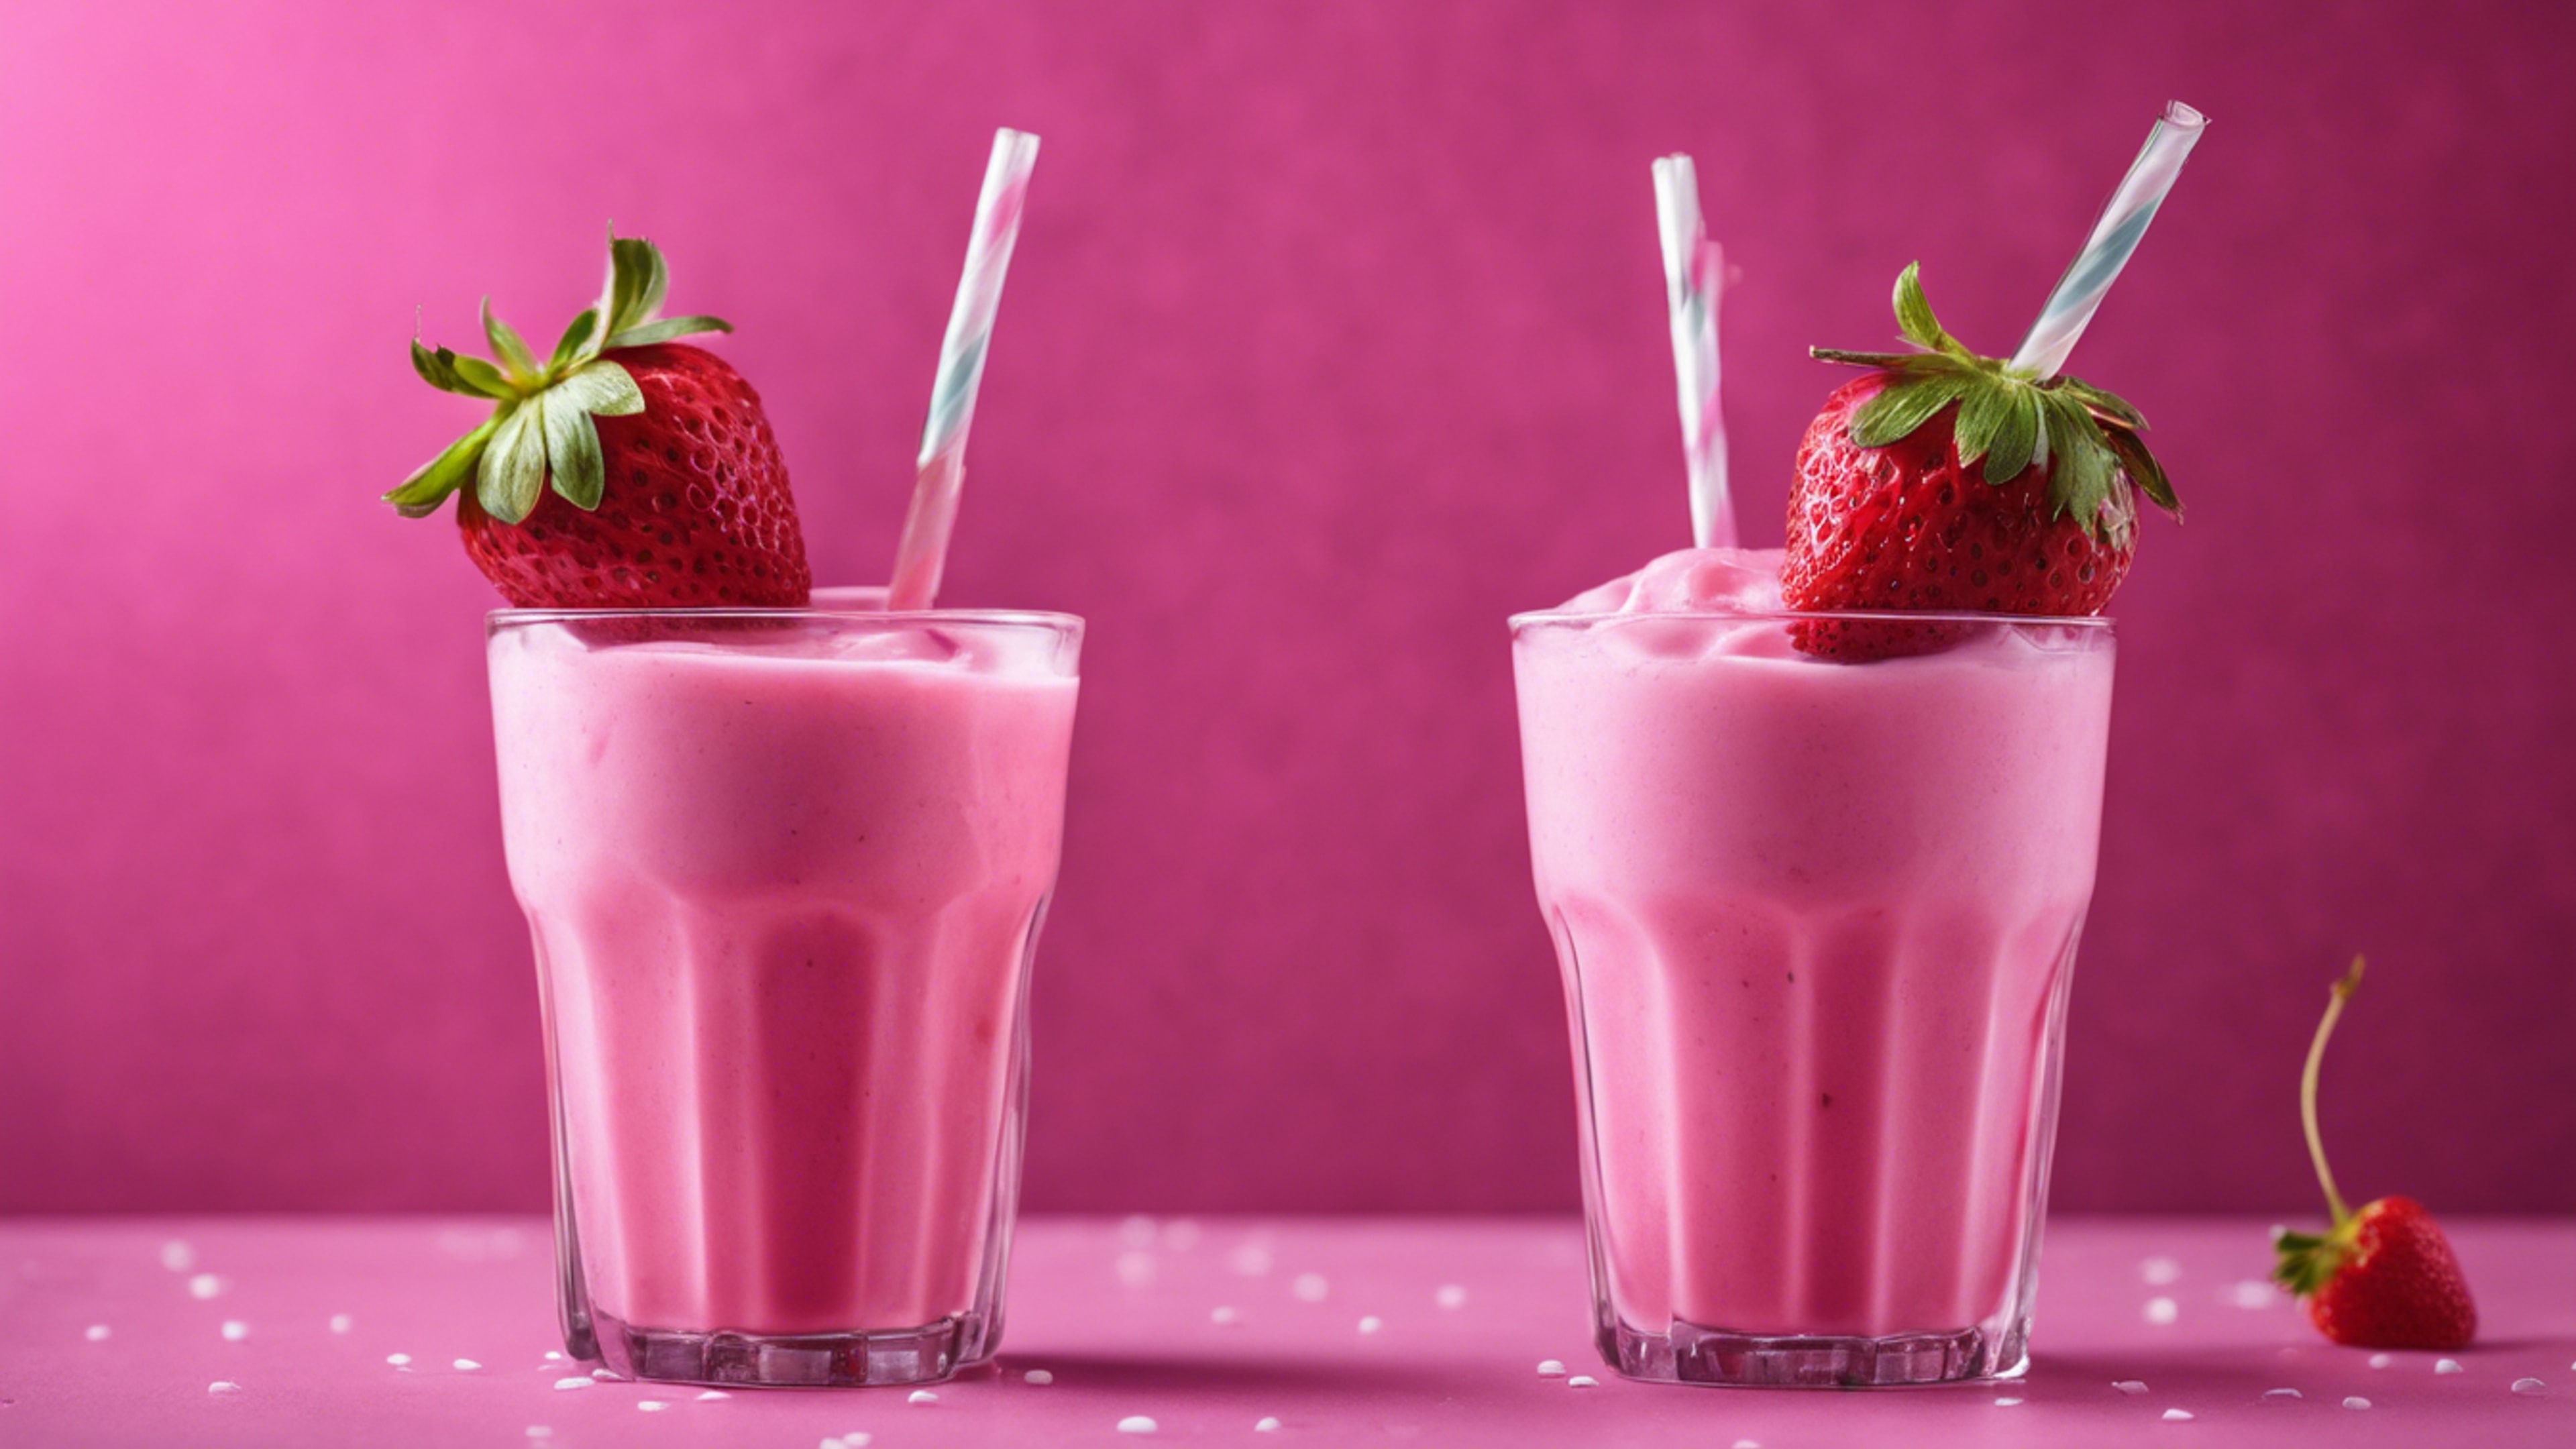 Two glasses filled with bright pink strawberry milkshake garnished with straws and cherries. Tapet[367e513037cf4f879d8a]